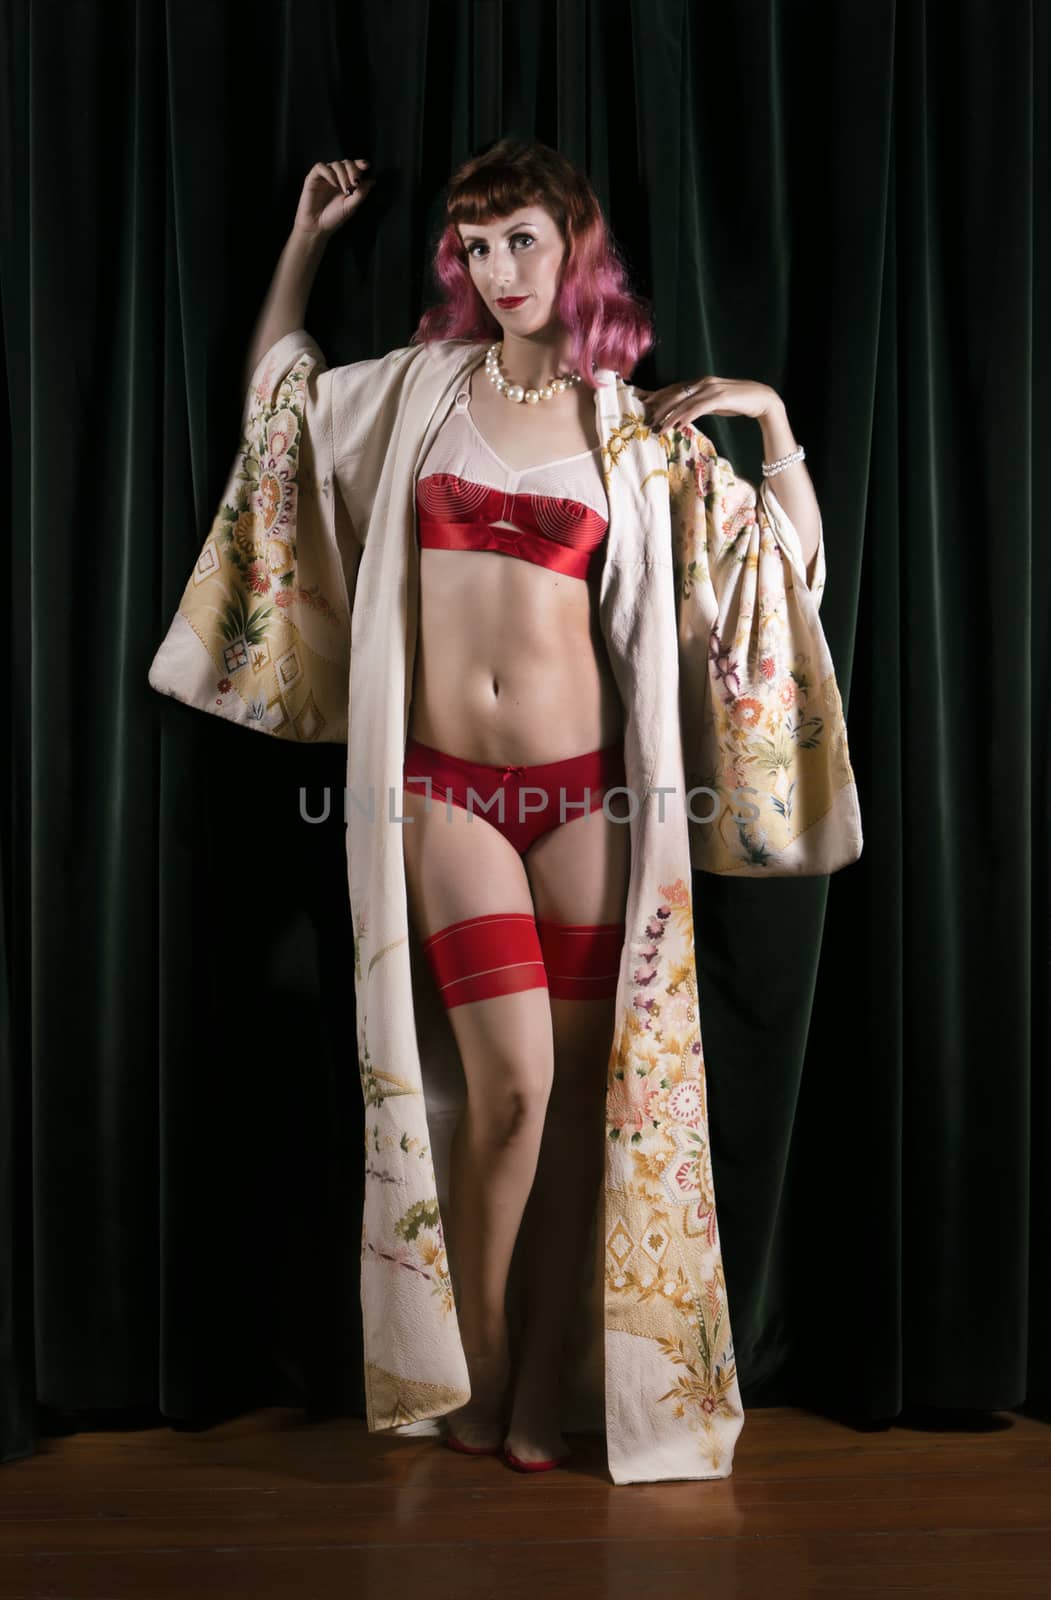 Girl with red vintage lingerie and kimono next to velvet curtains.